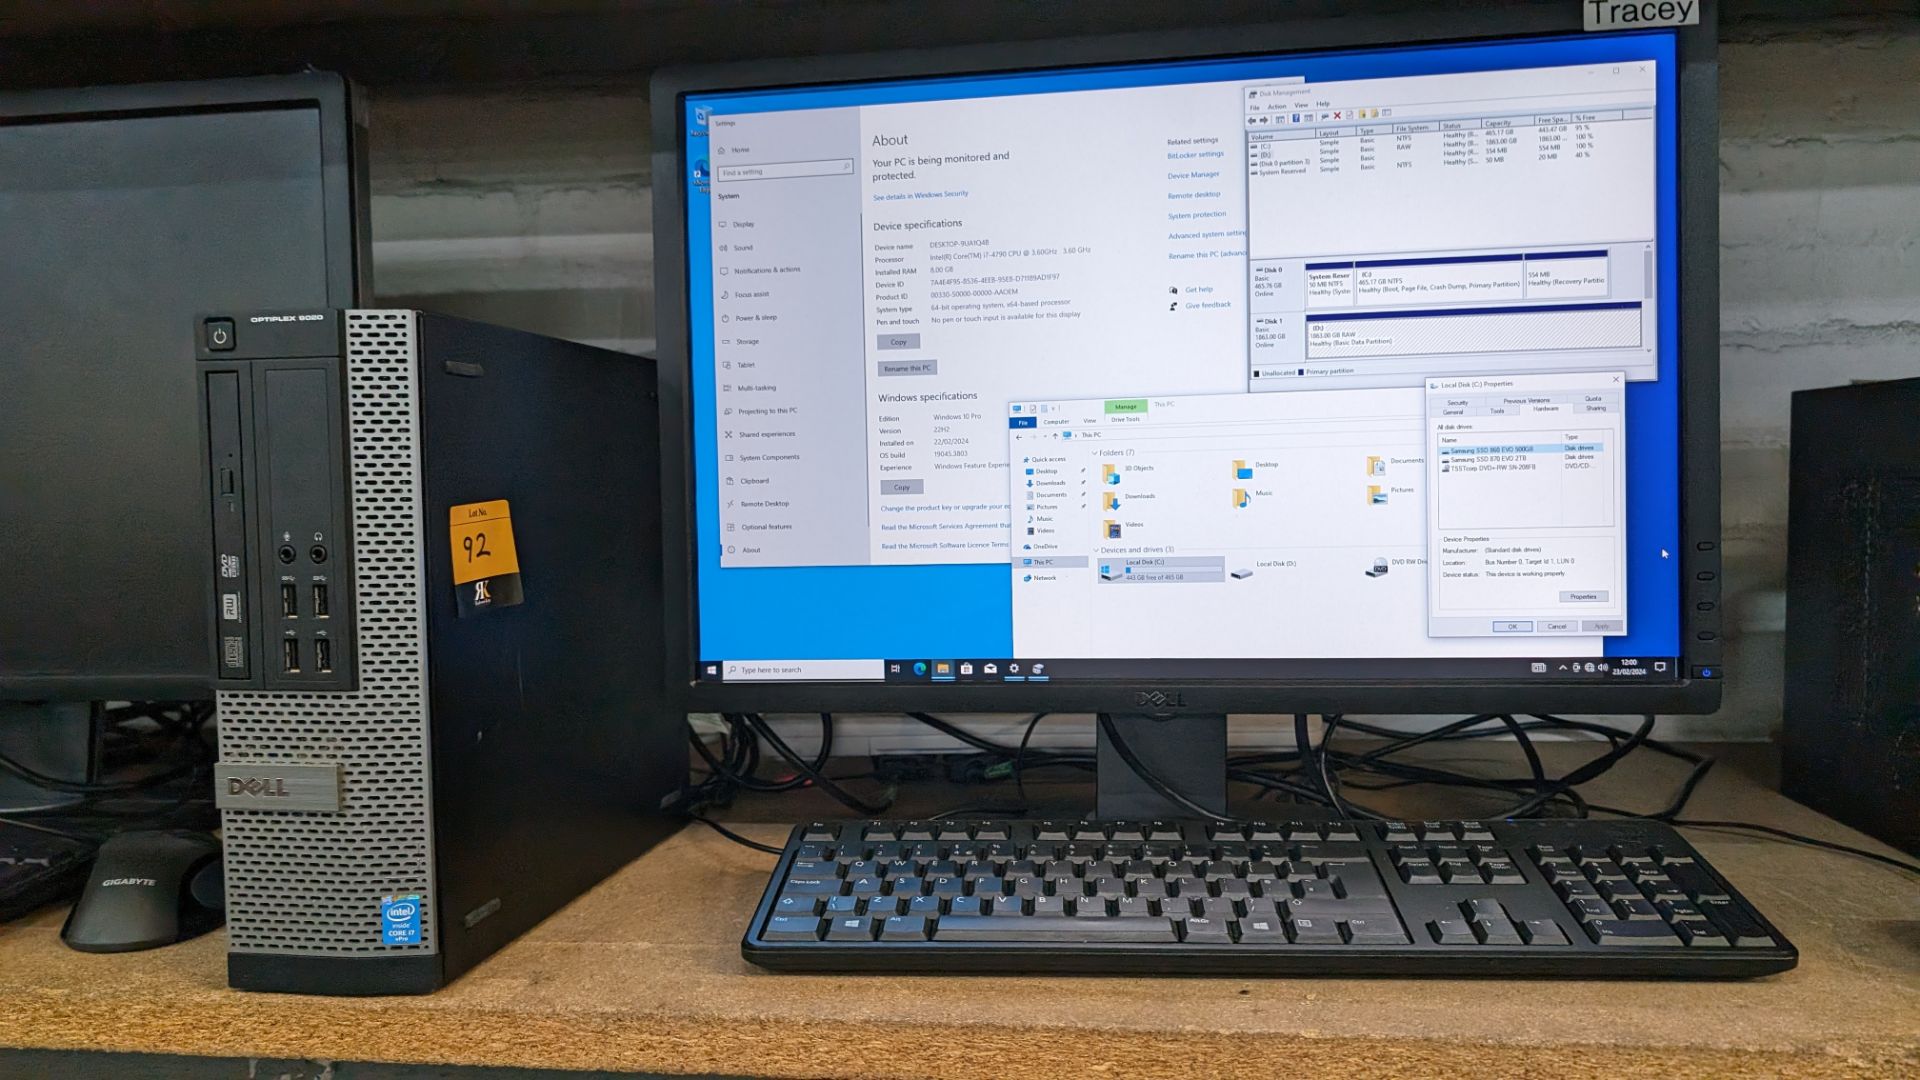 Dell Optiplex 9020 compact tower computer with Intel i7 vPro processor, including widescreen monitor